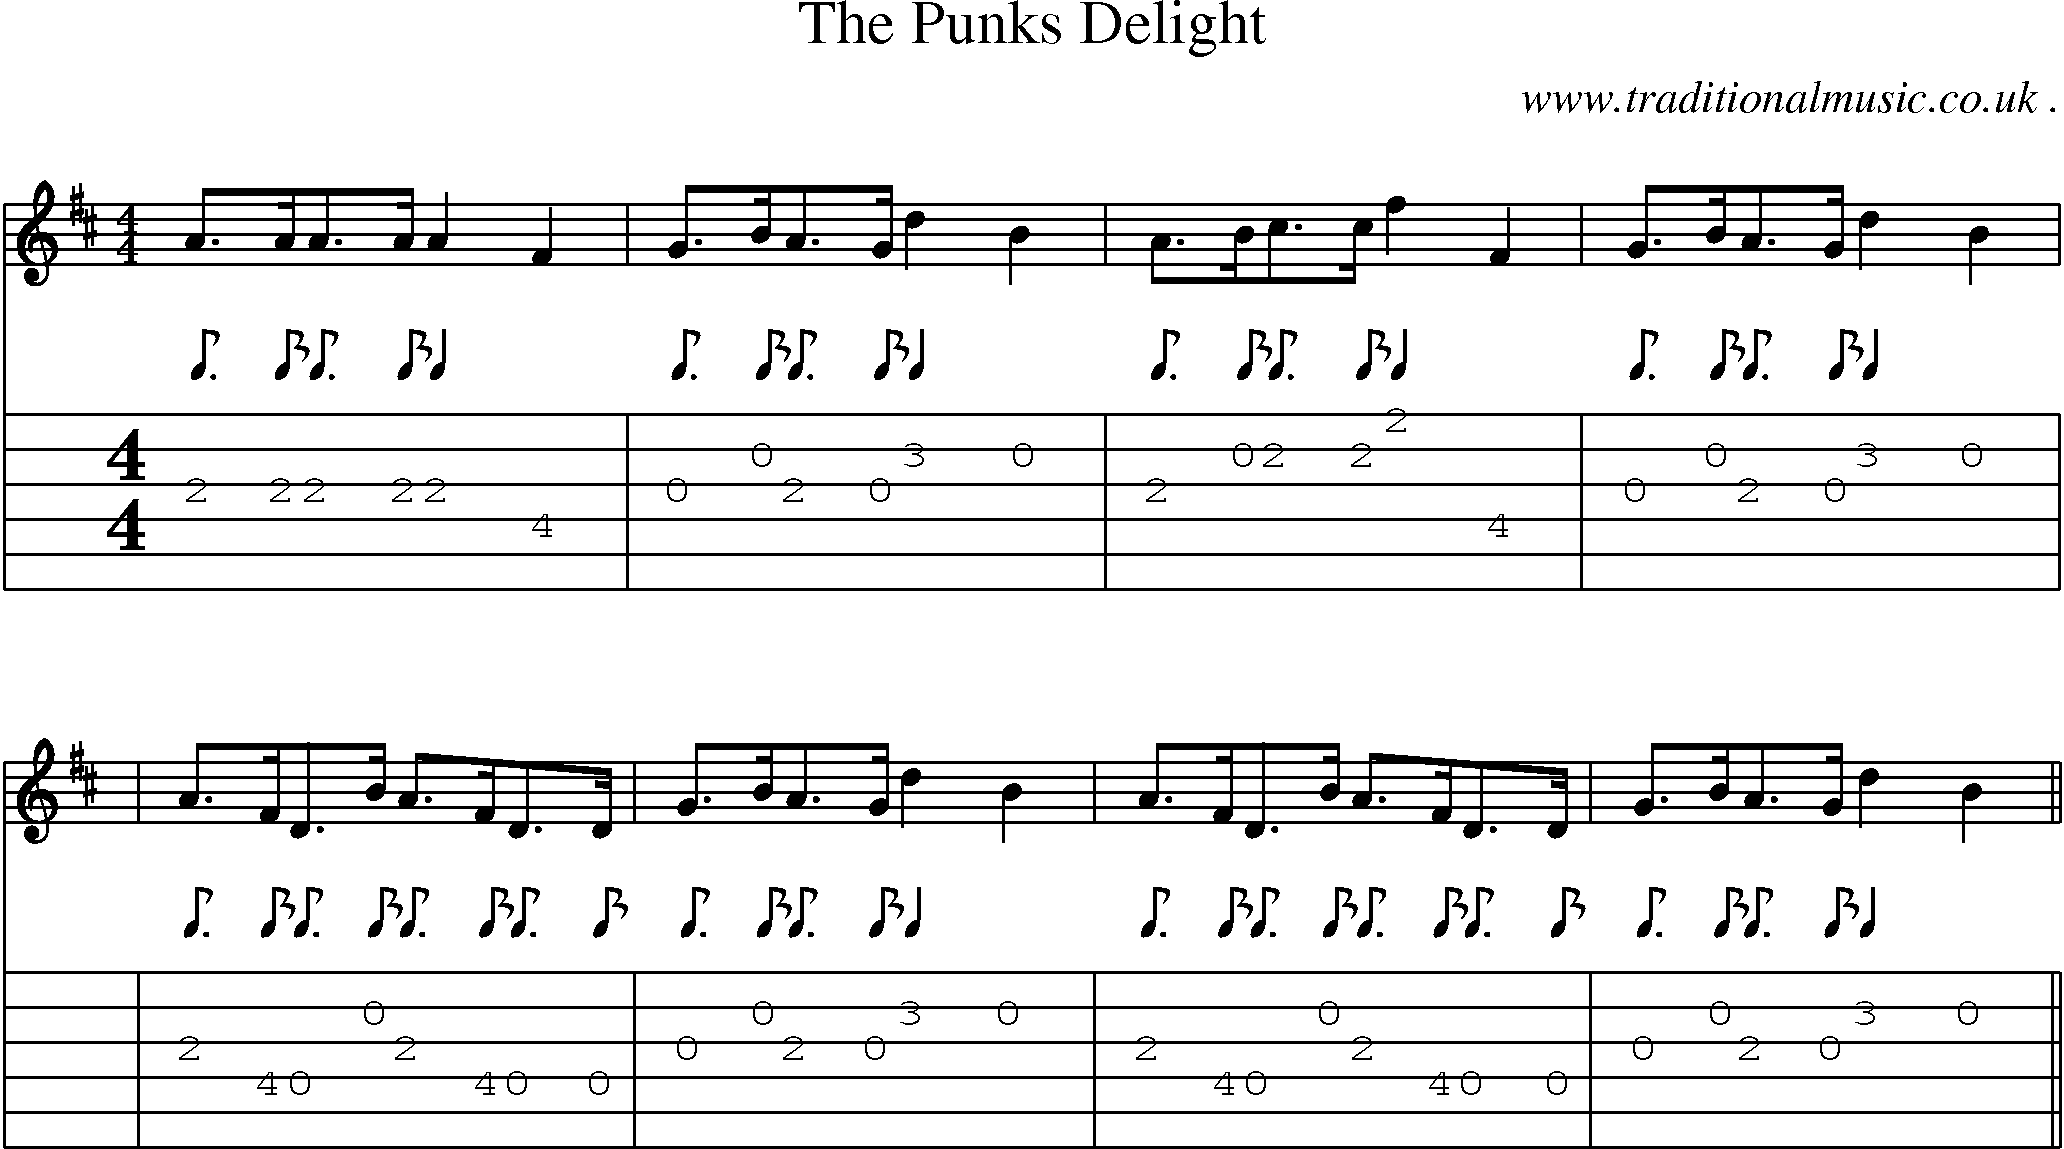 Sheet-Music and Guitar Tabs for The Punks Delight